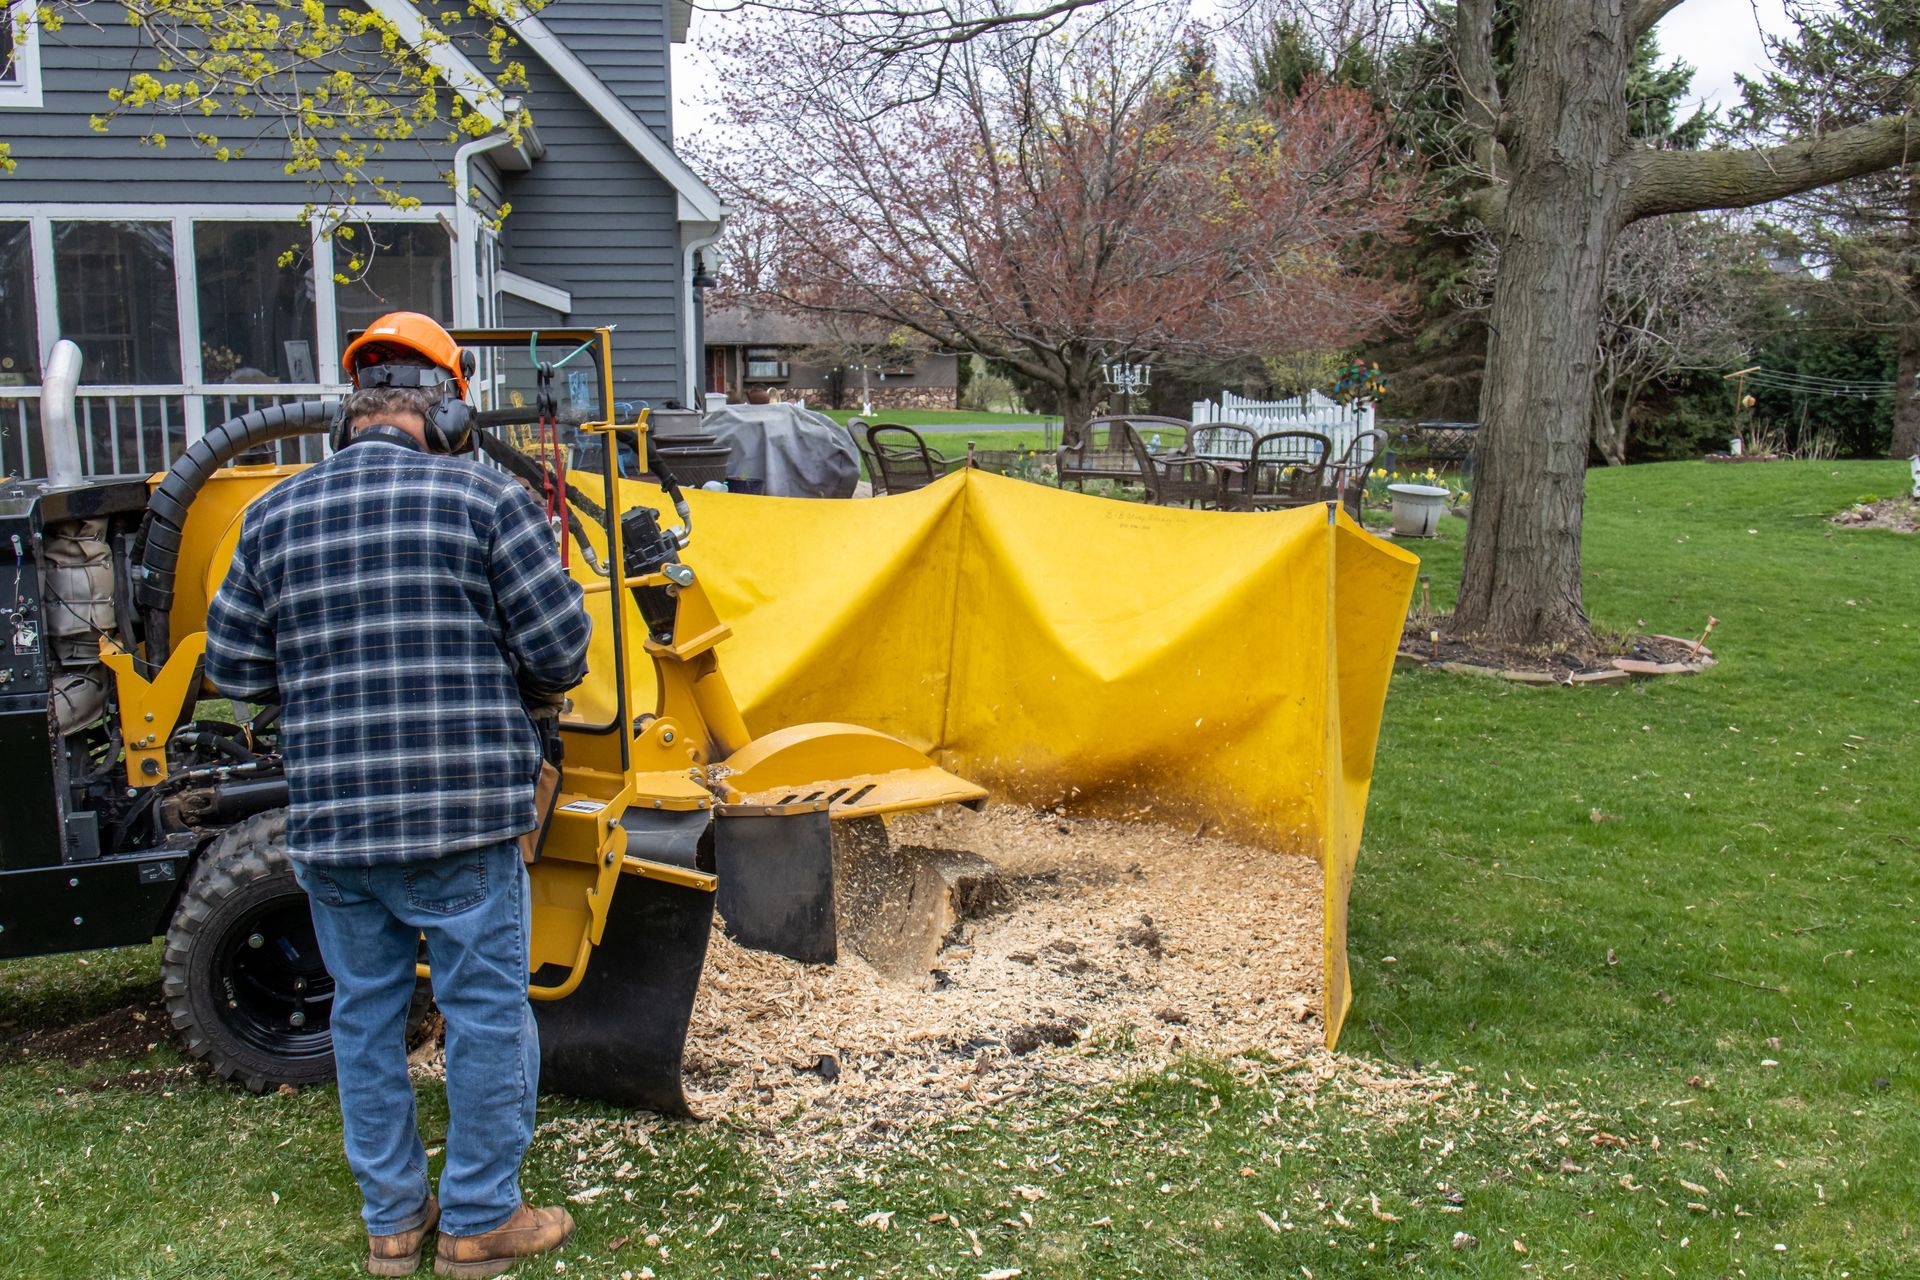 a man operating a stump grinder in someones front yard.